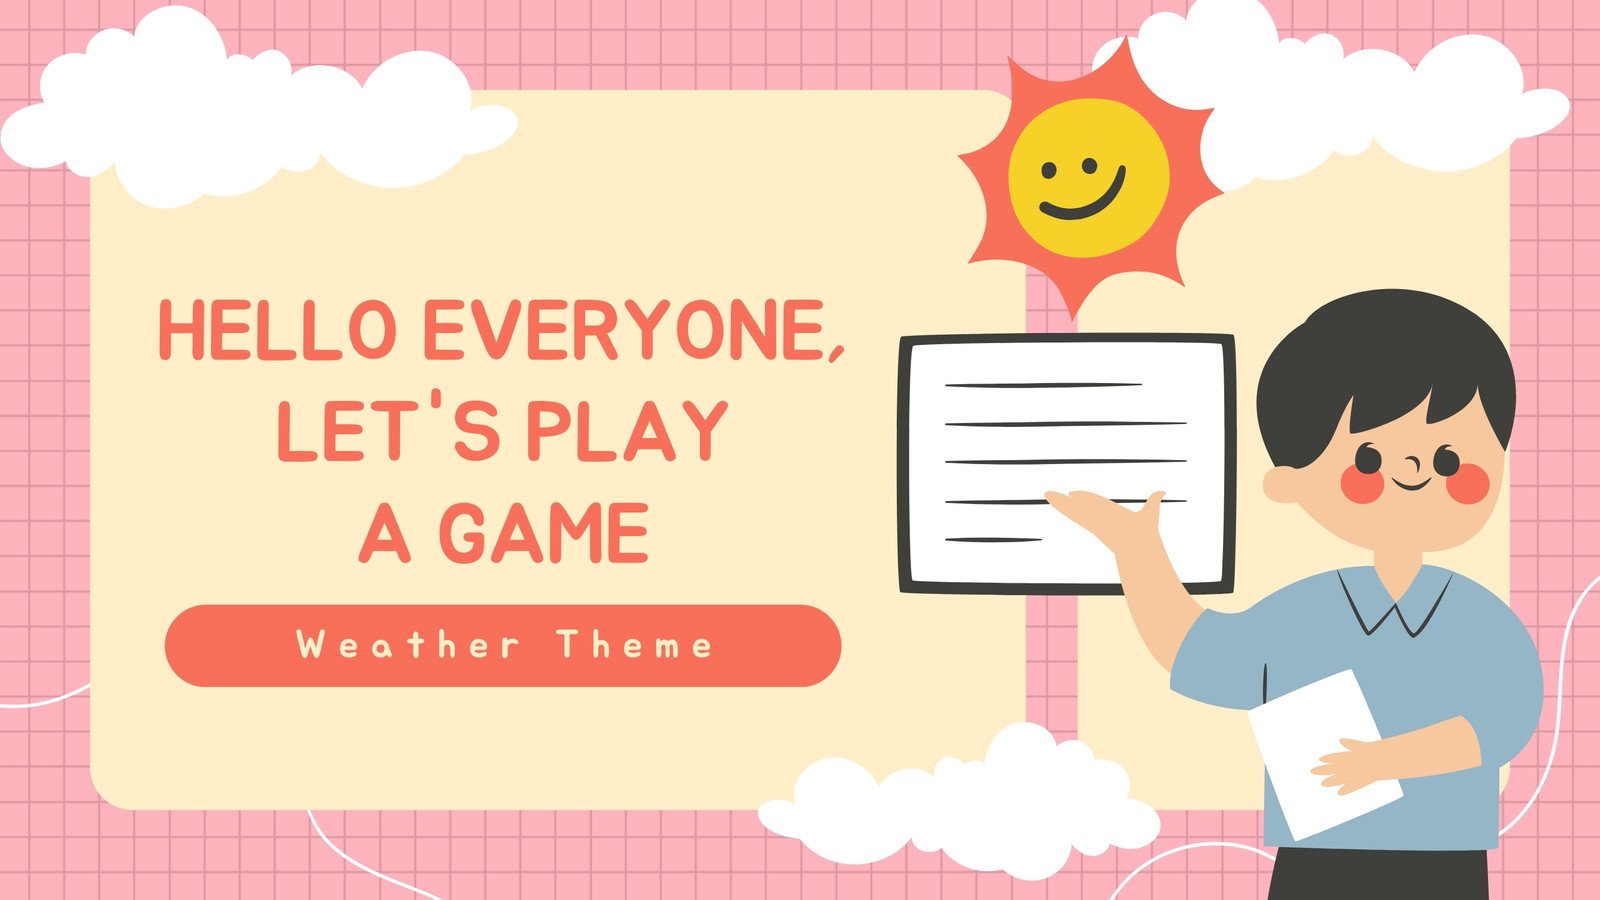 Free and customizable game presentation templates | Canva